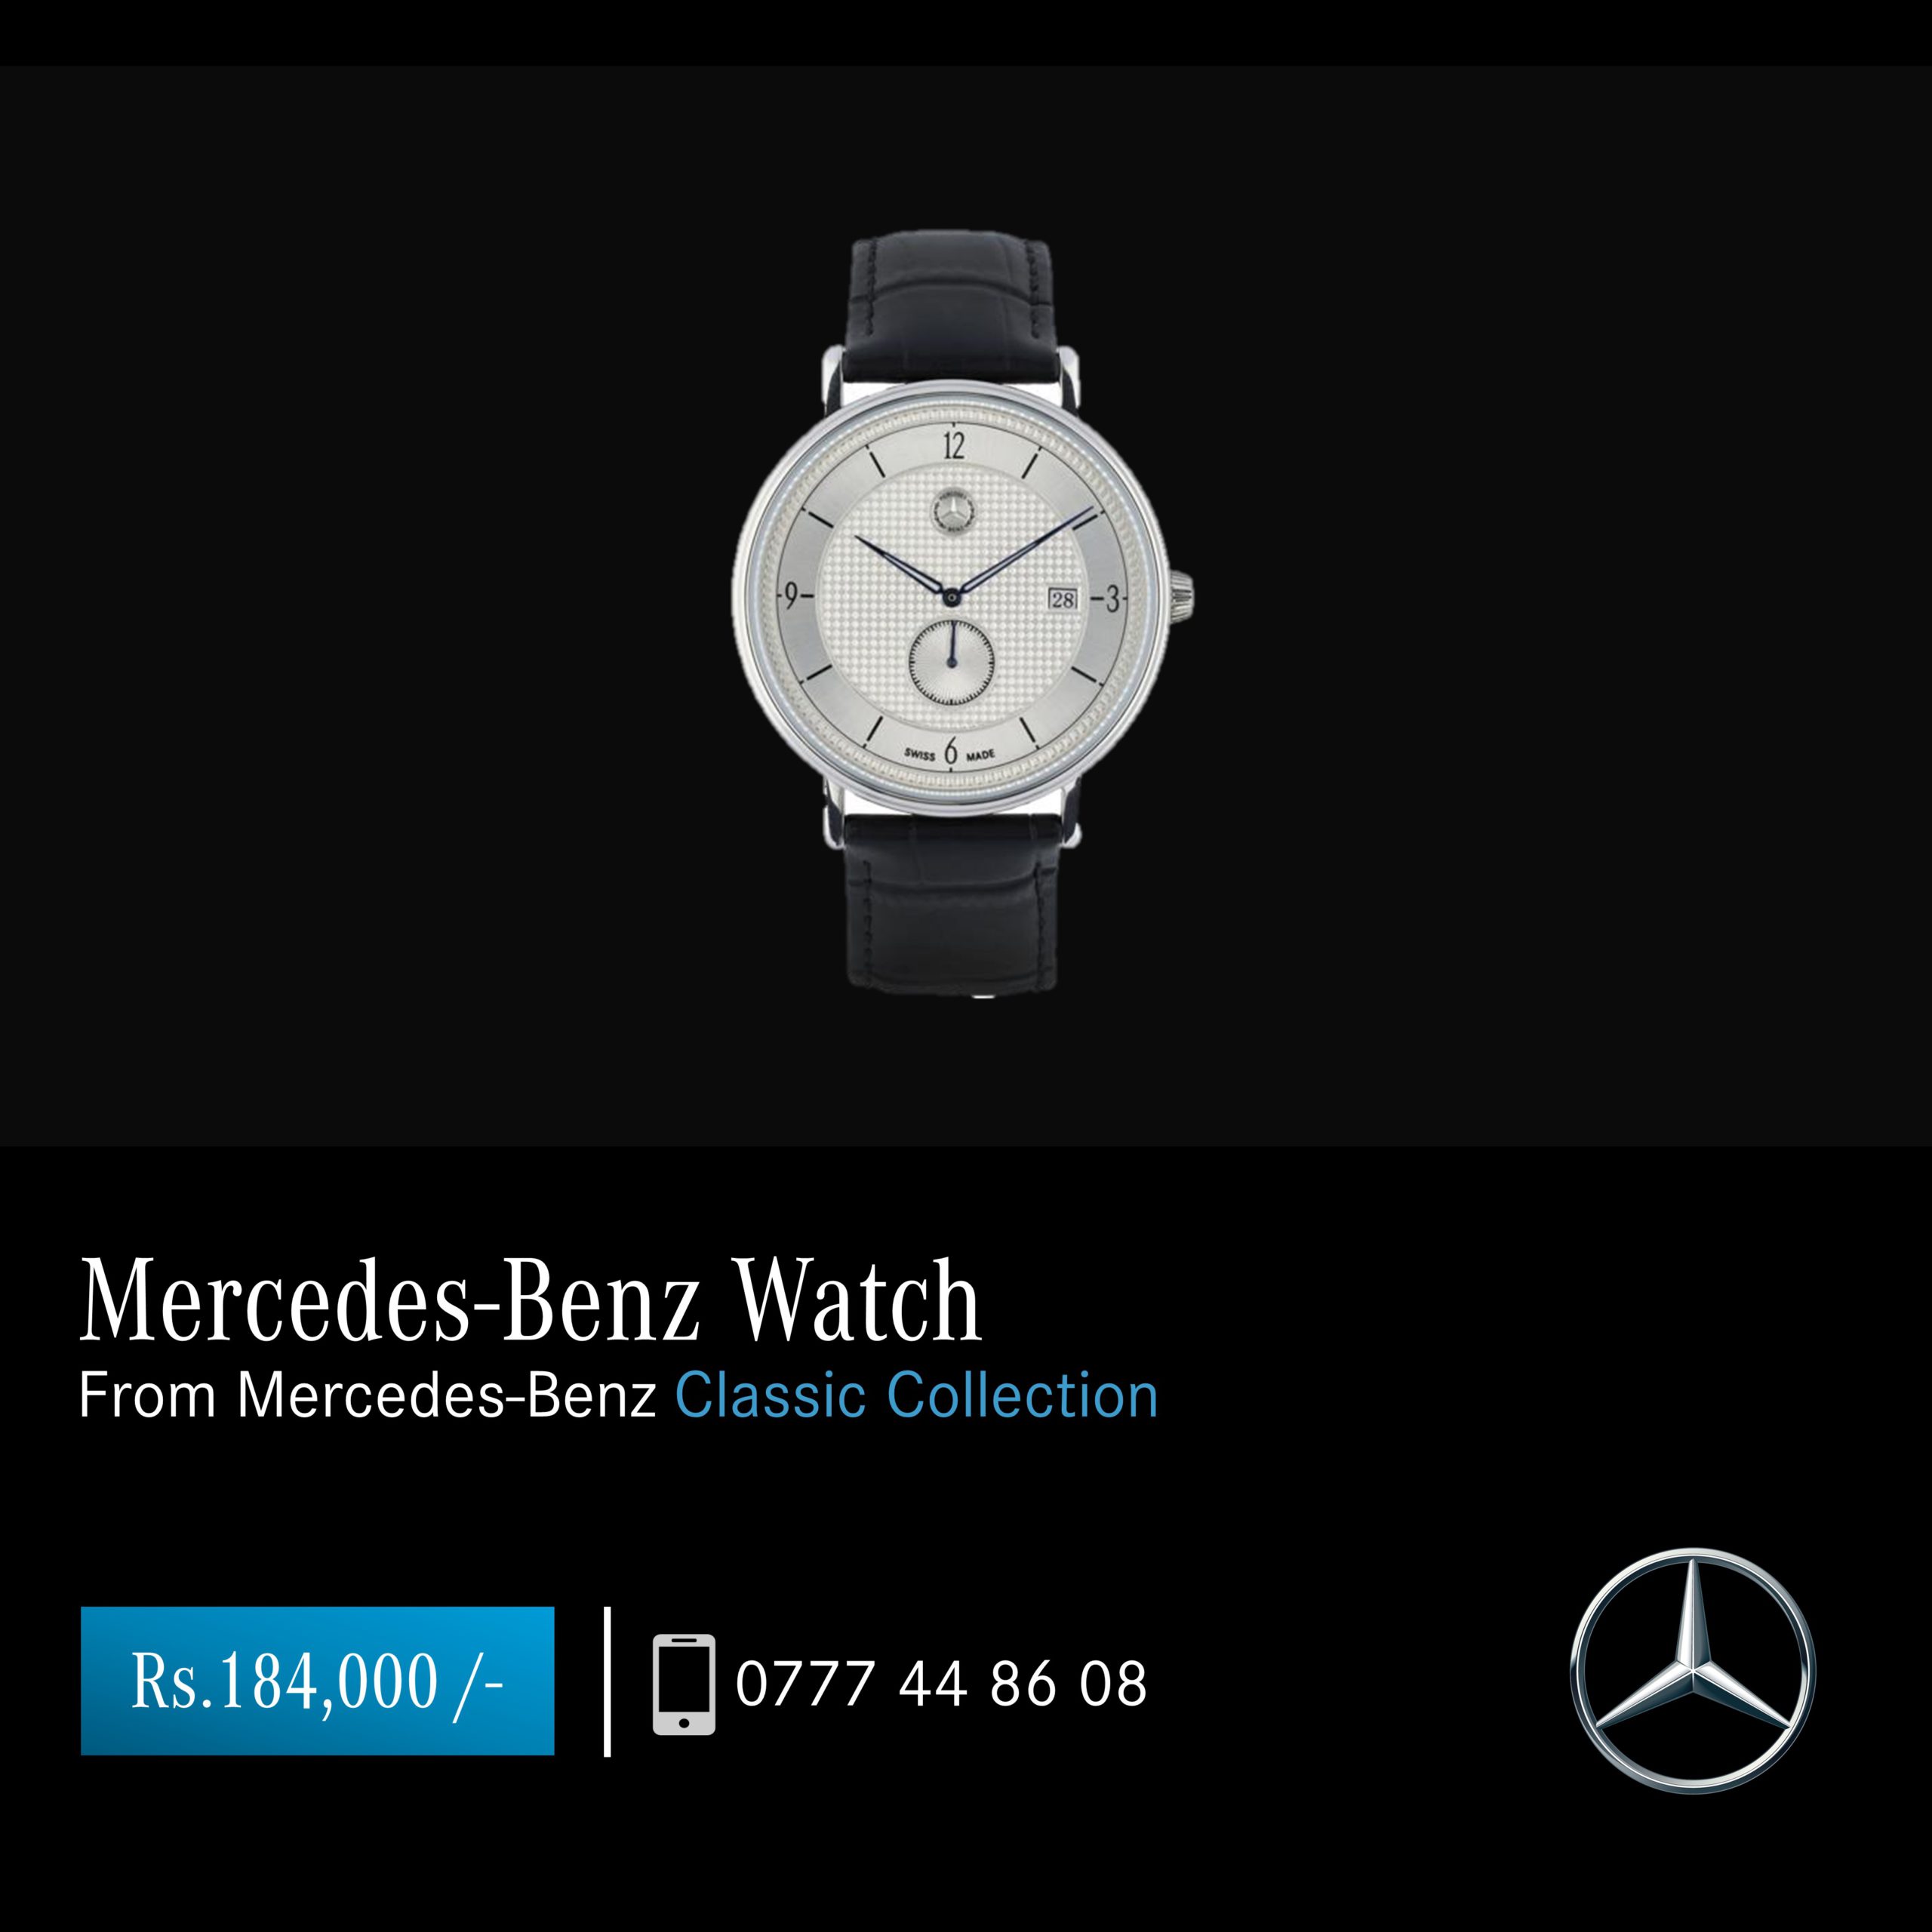 MERCEDES BENZ Classic Accessory Vintage Retro Design Swiss Made FORTIS Watch  for sale online | eBay